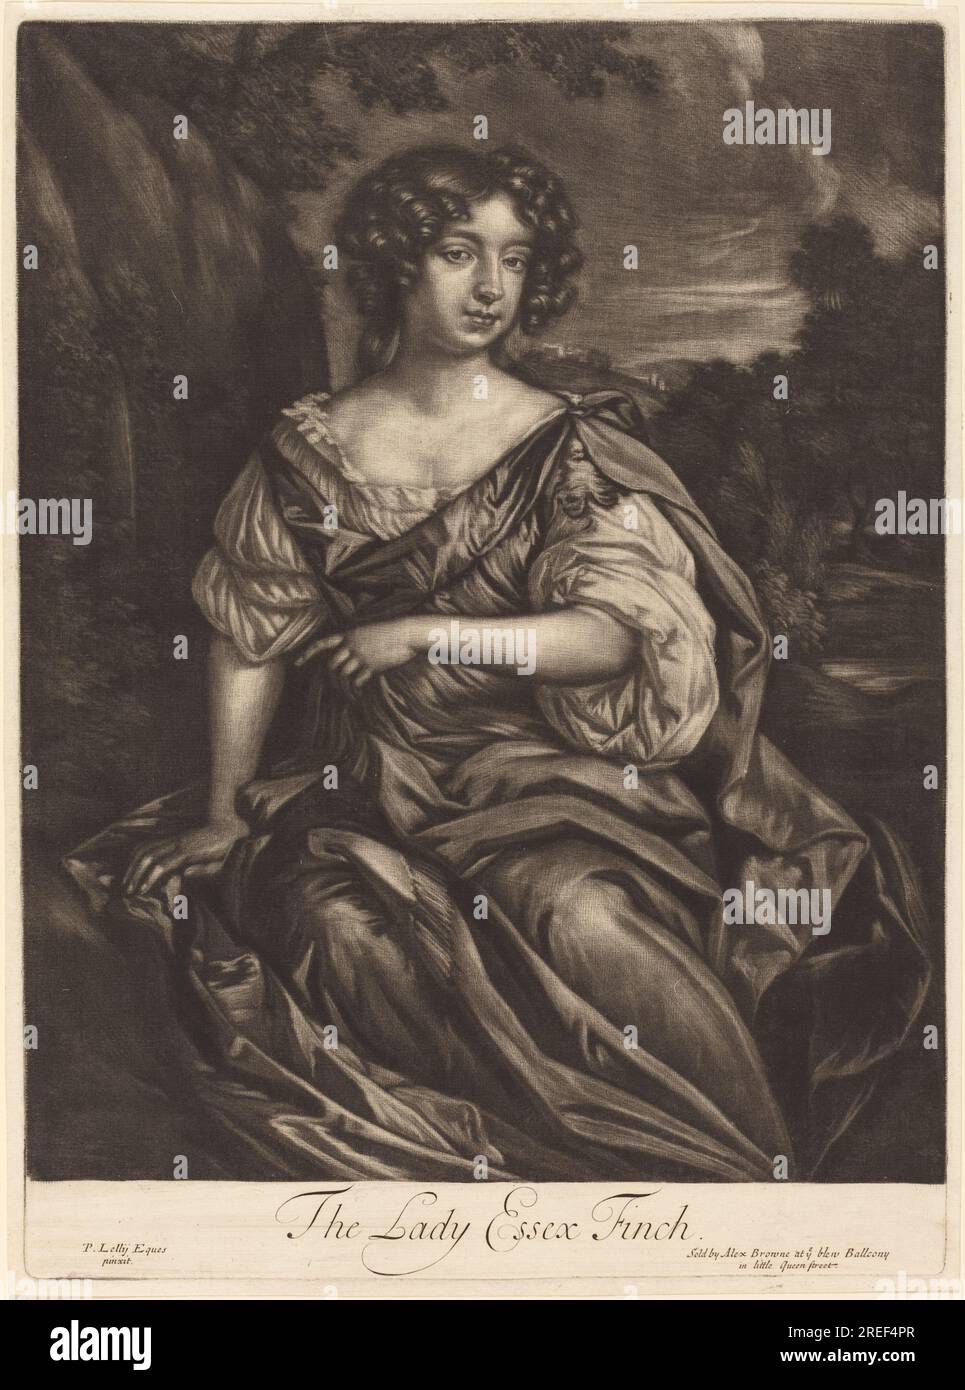 'Alexander Browne after Sir Peter Lely, The Lady Essex Finch, c. 1680, mezzotint on laid paper, plate: 33.9 x 24.8 cm (13 3/8 x 9 3/4 in.) sheet: 34.9 x 25.7 cm (13 3/4 x 10 1/8 in.), Paul Mellon Fund, 2001.118.3' Stock Photo